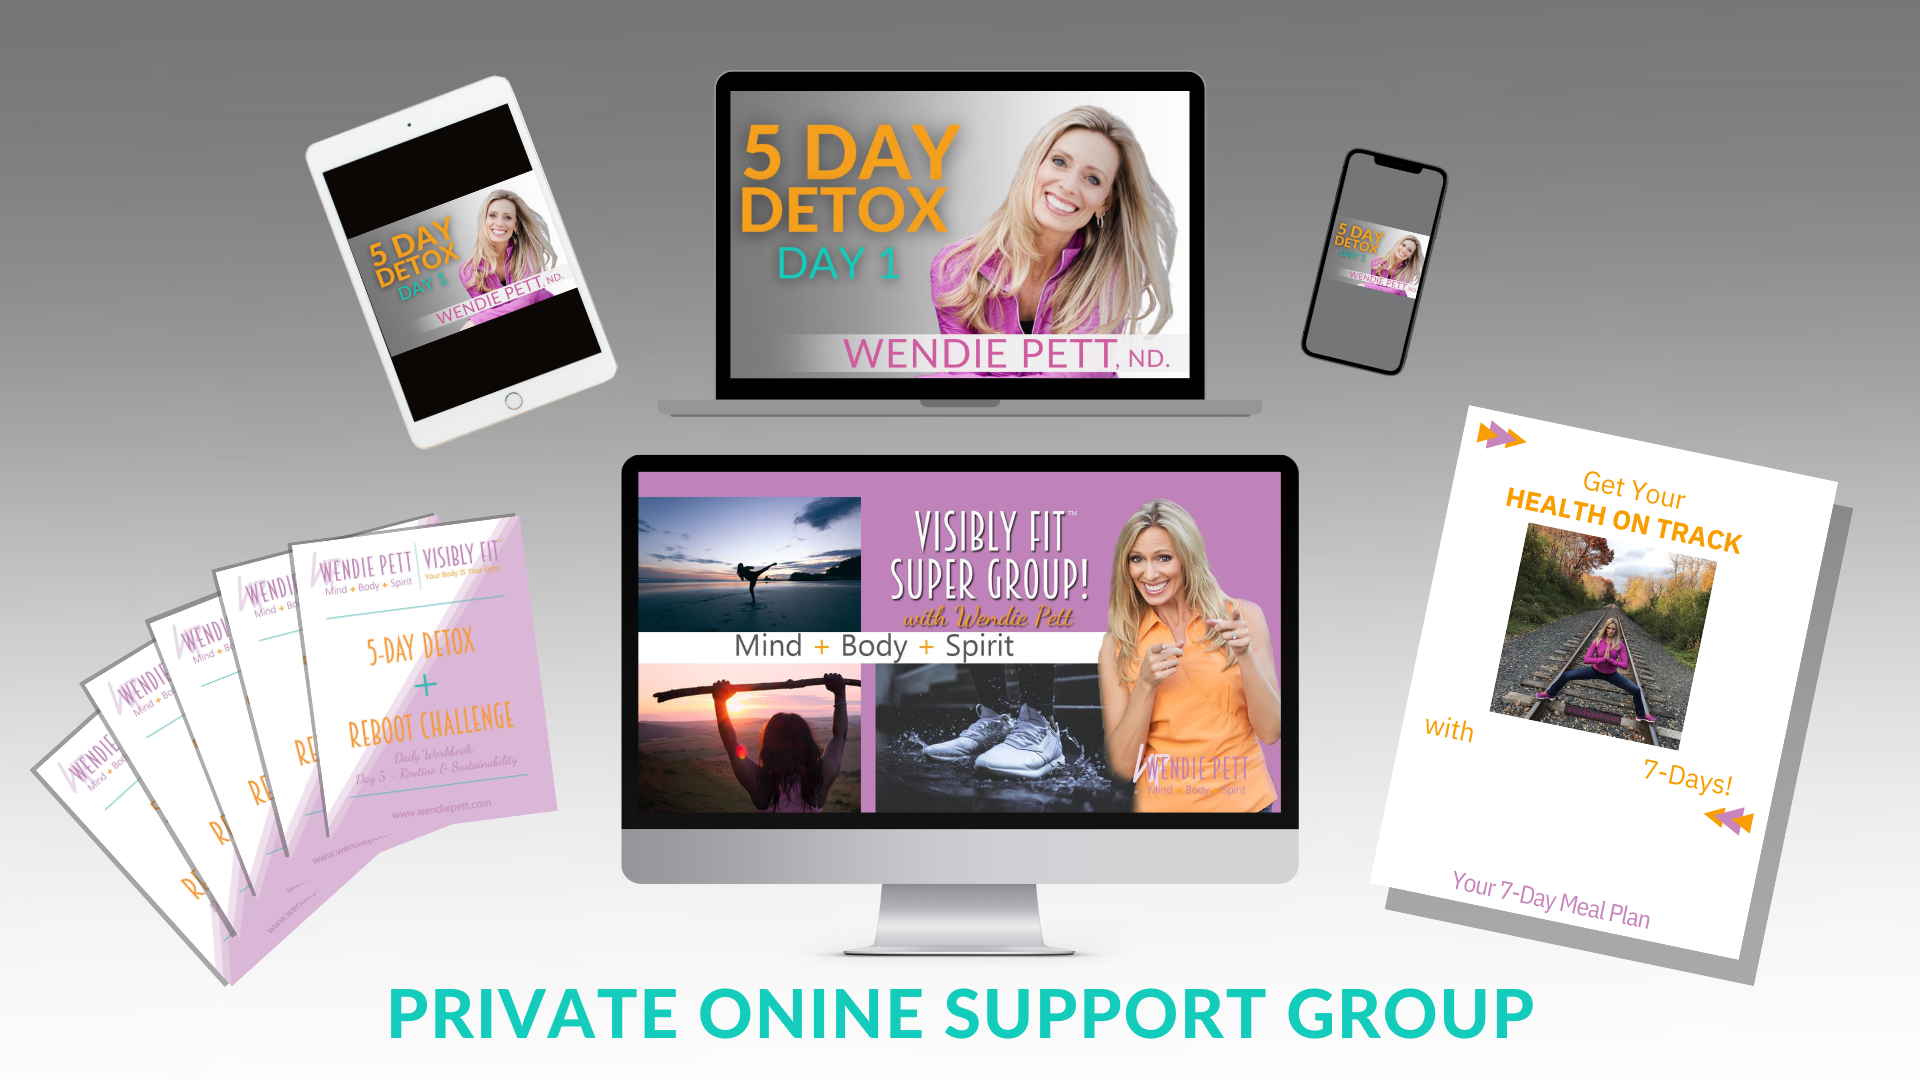 Acess To Private Online Support Group as part of the 5 Day Detox + Reboot with Wendie Pett